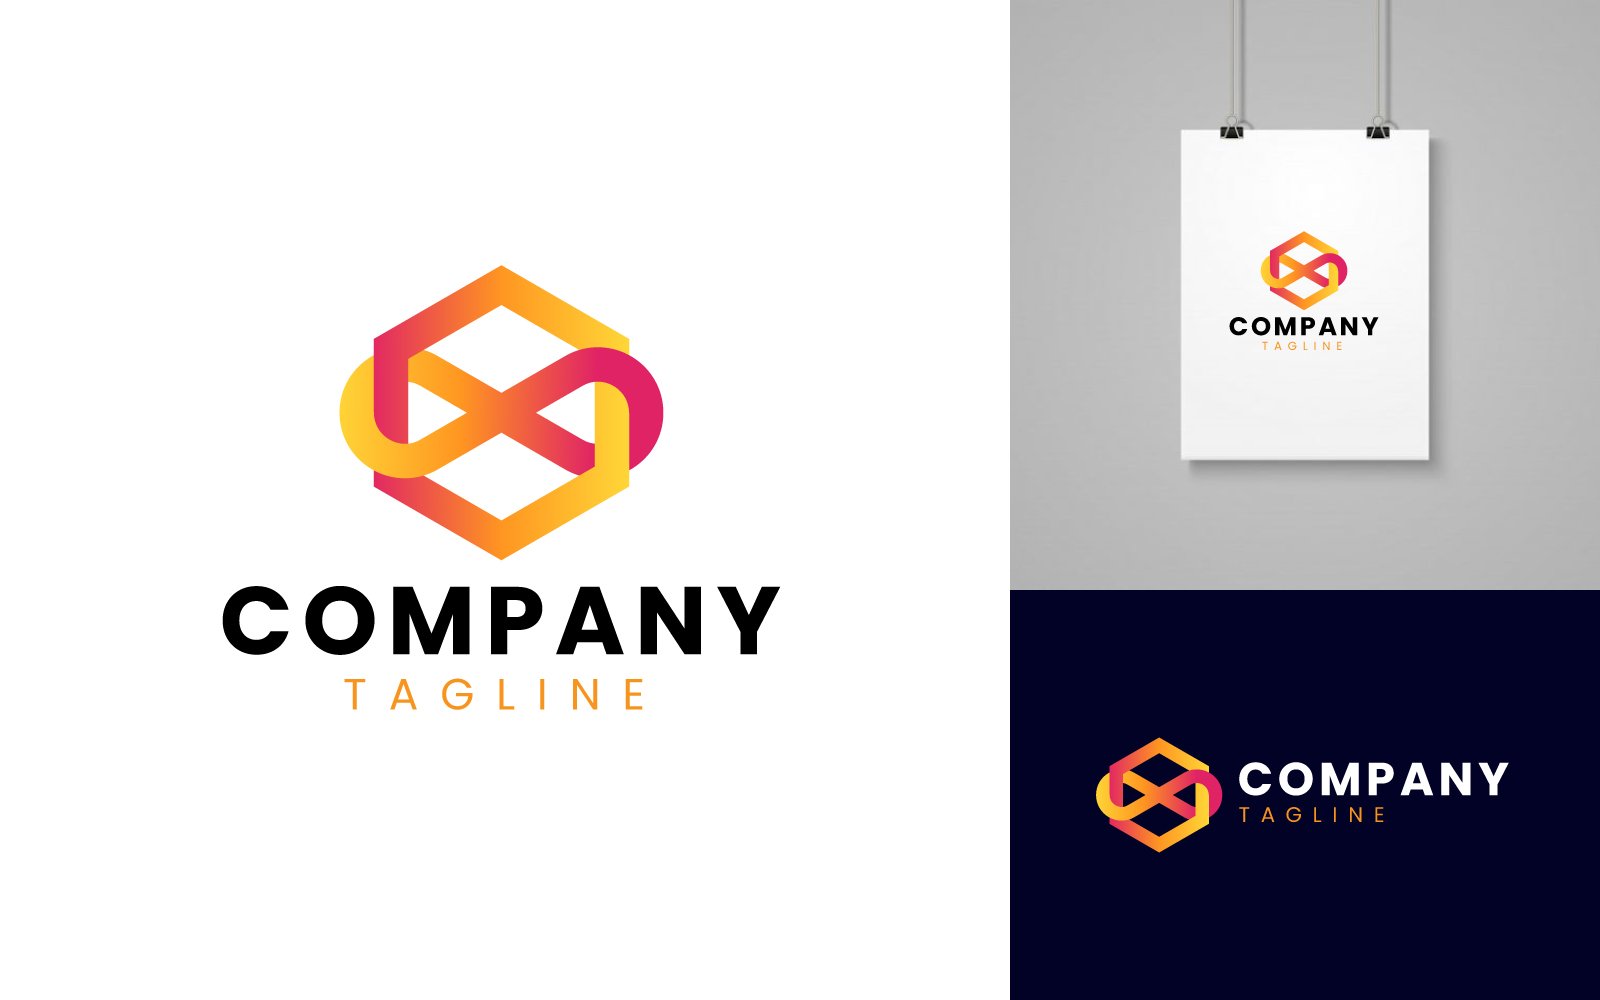 Hexagon With Infinity sign Logo Template